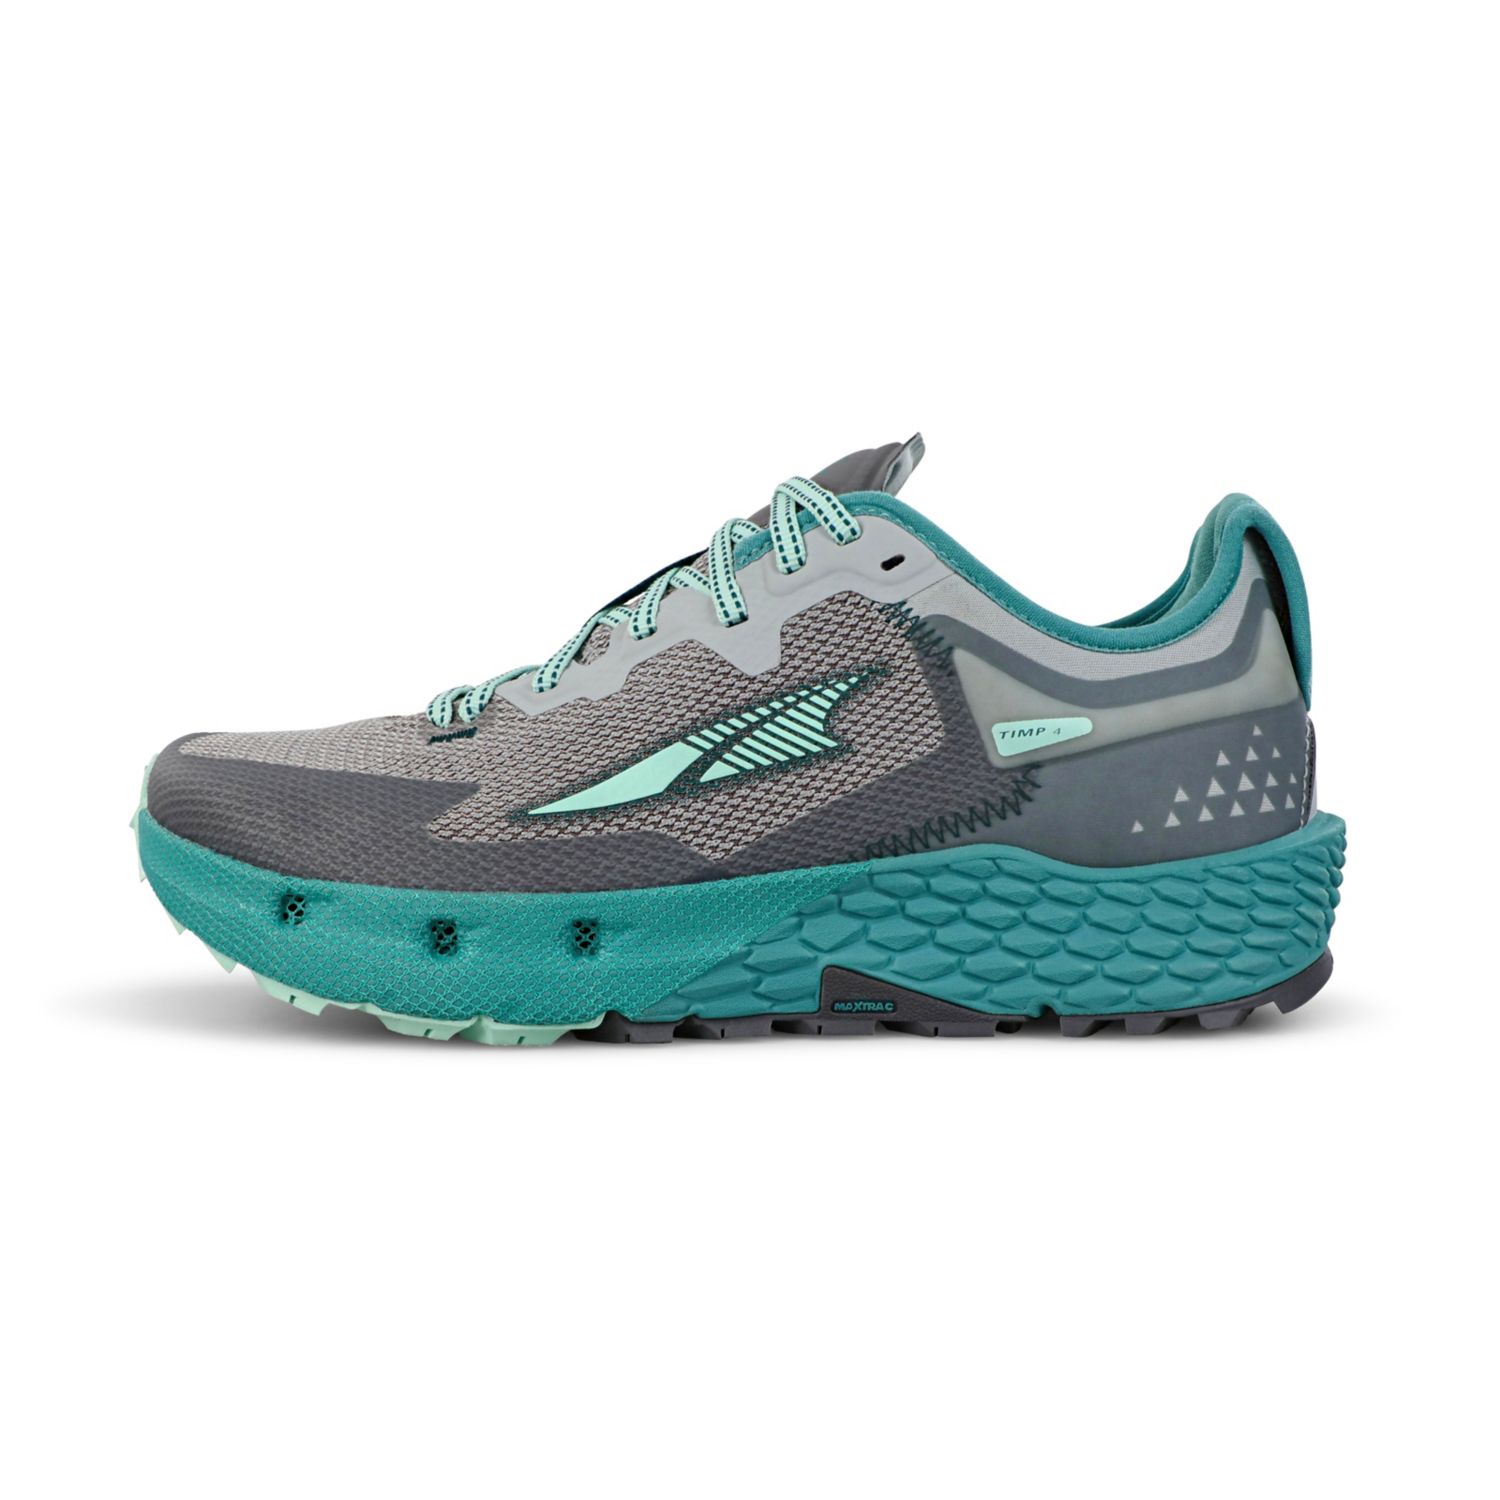 Grey / Turquoise Altra Timp 4 Women's Trail Running Shoes | Ireland-41395789